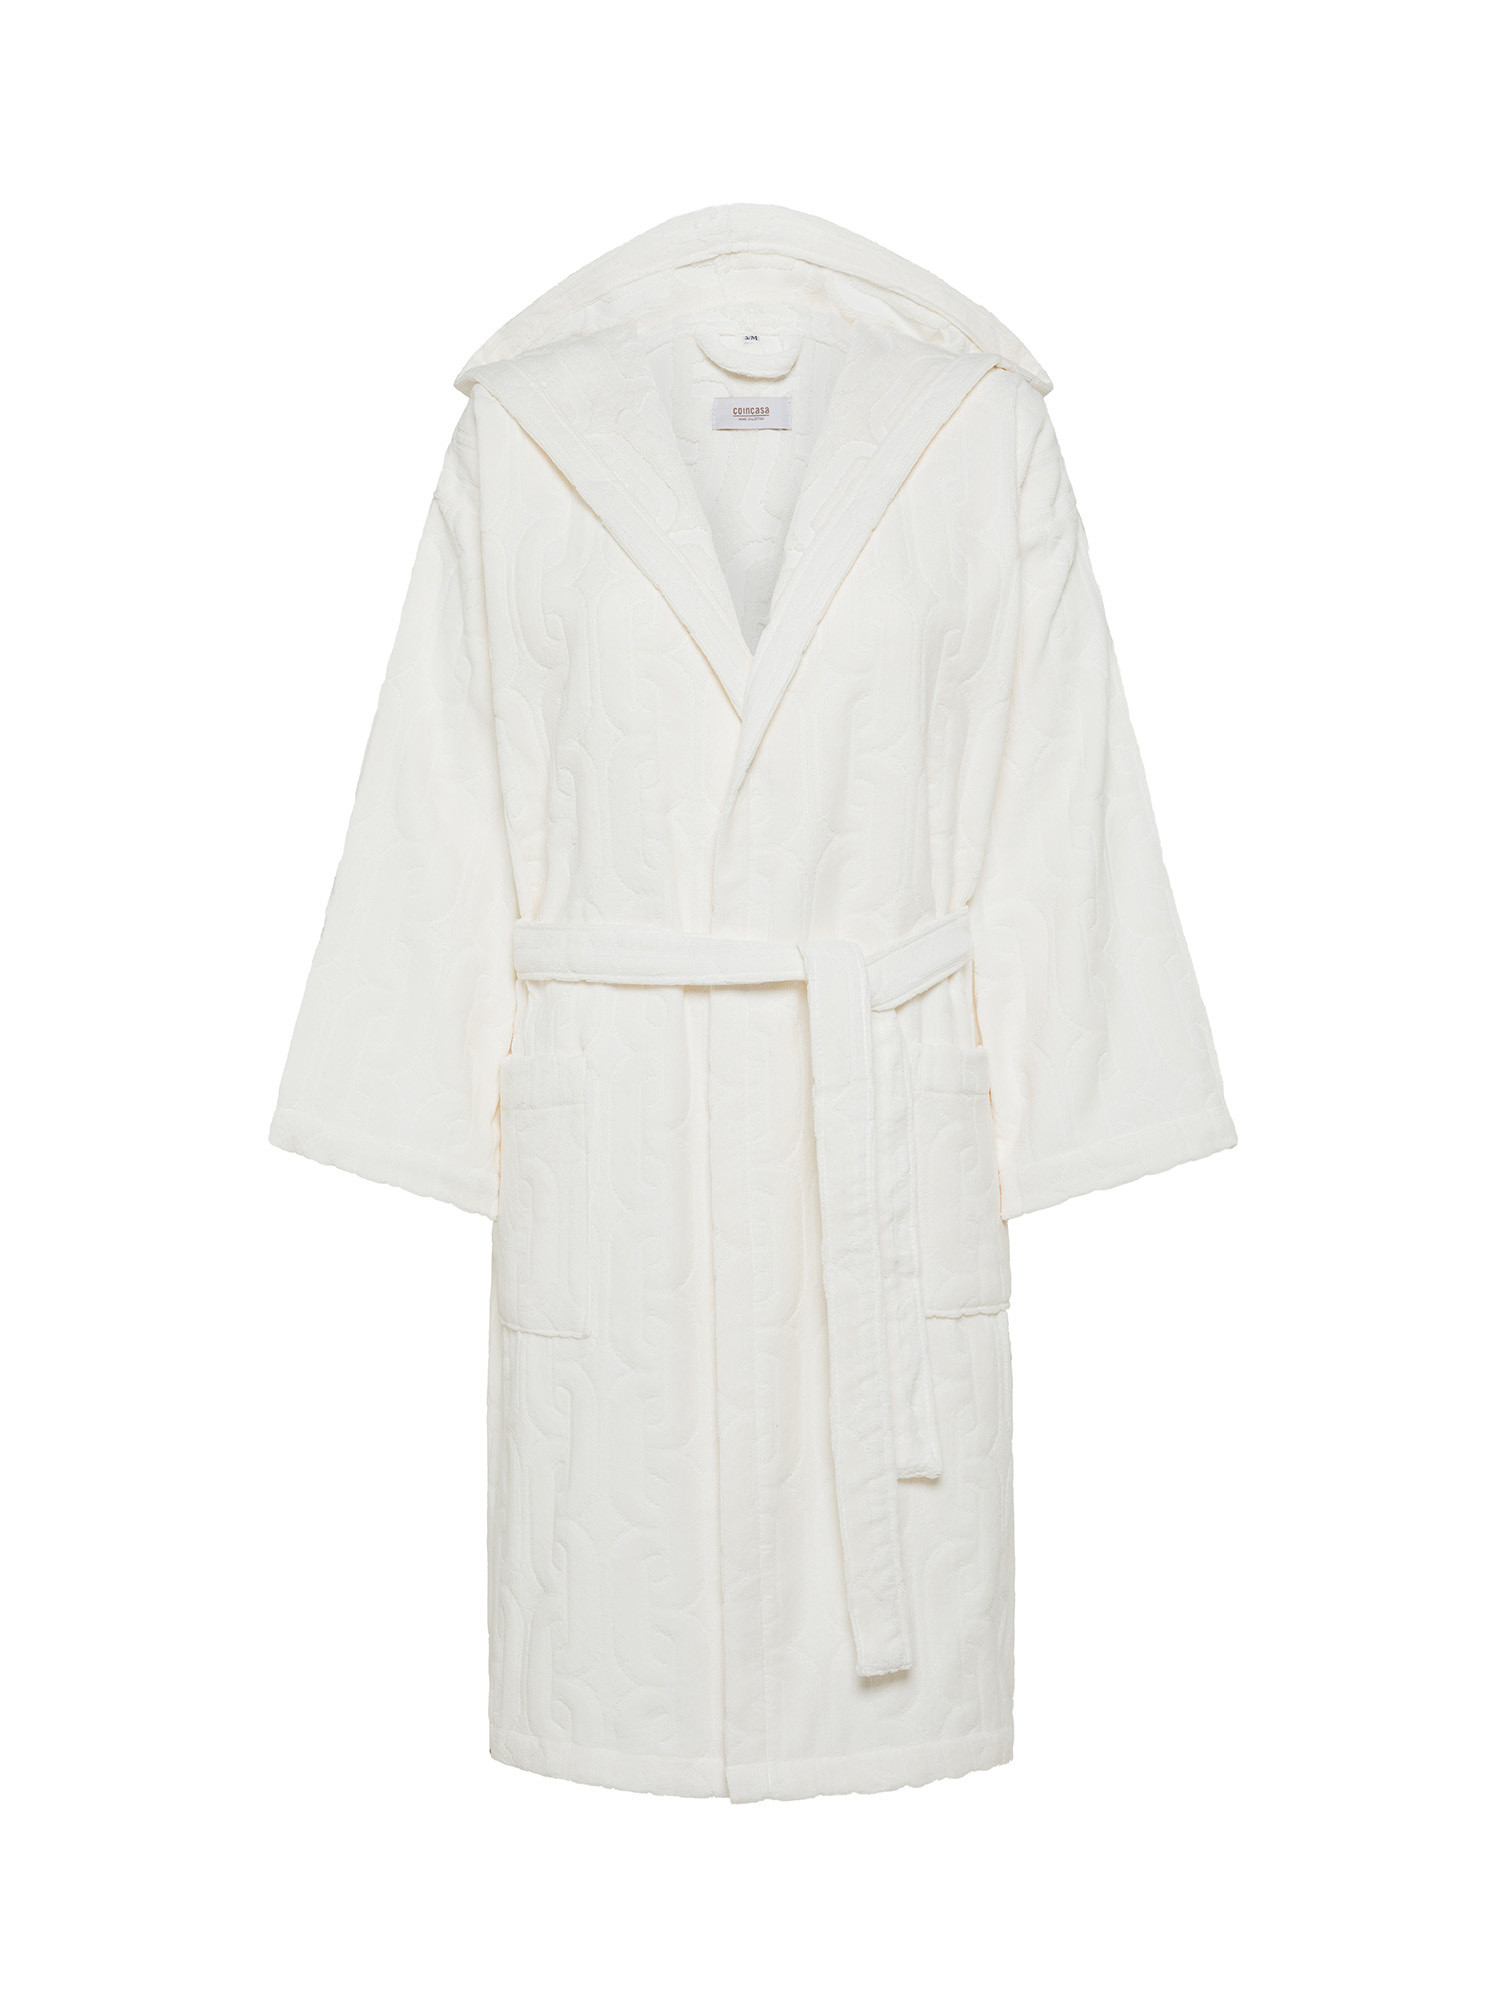 Cotton velour bathrobe with geometric relief pattern, White, large image number 0